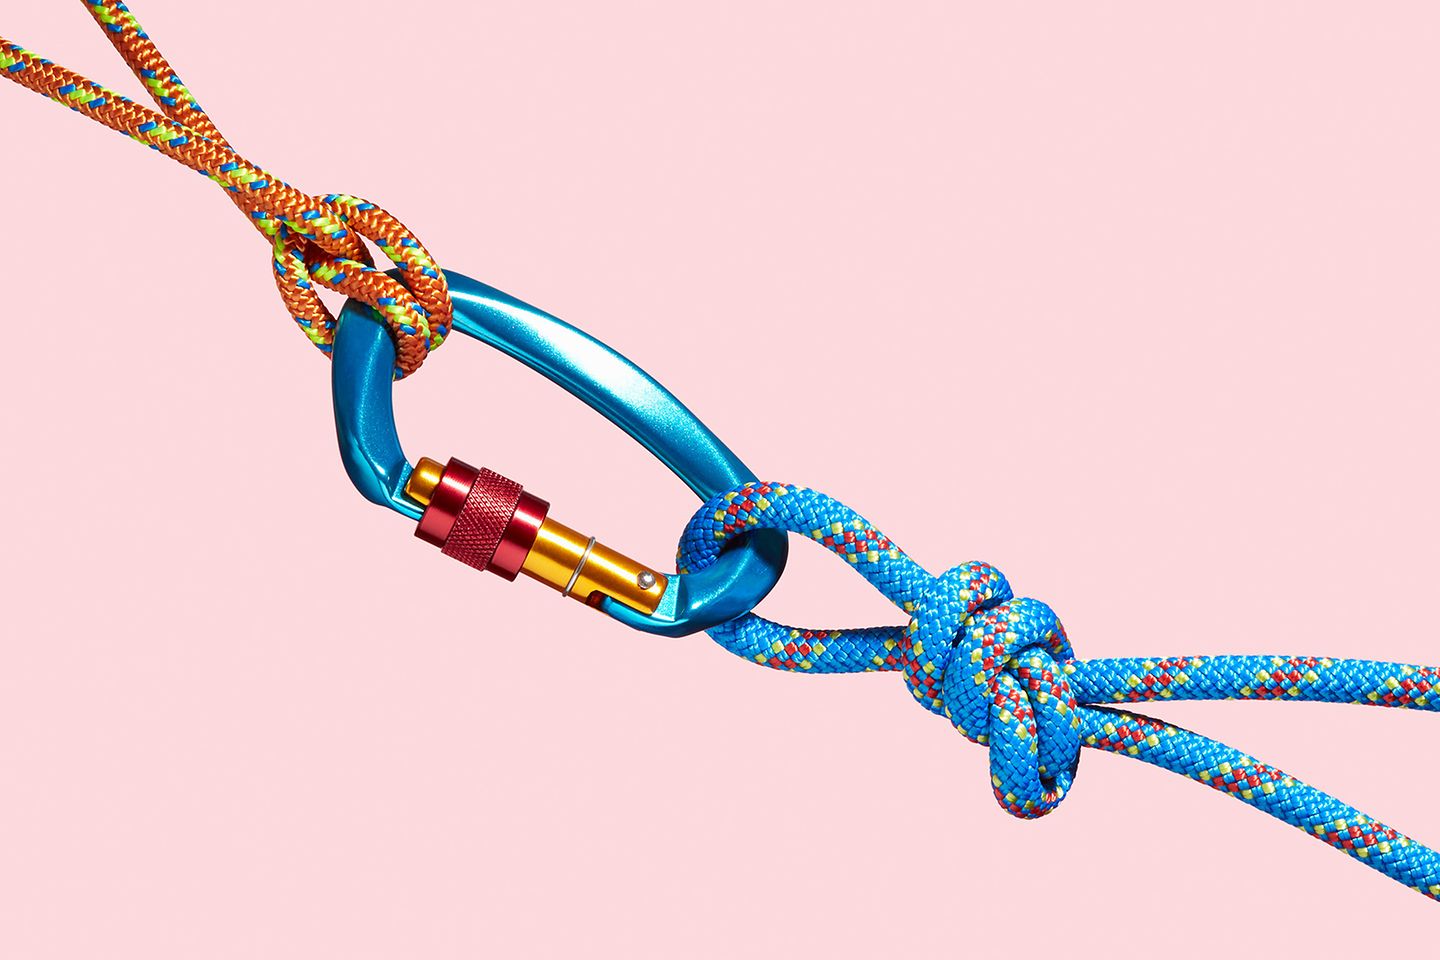 An orange and a blue rope with a karabiner in their loops